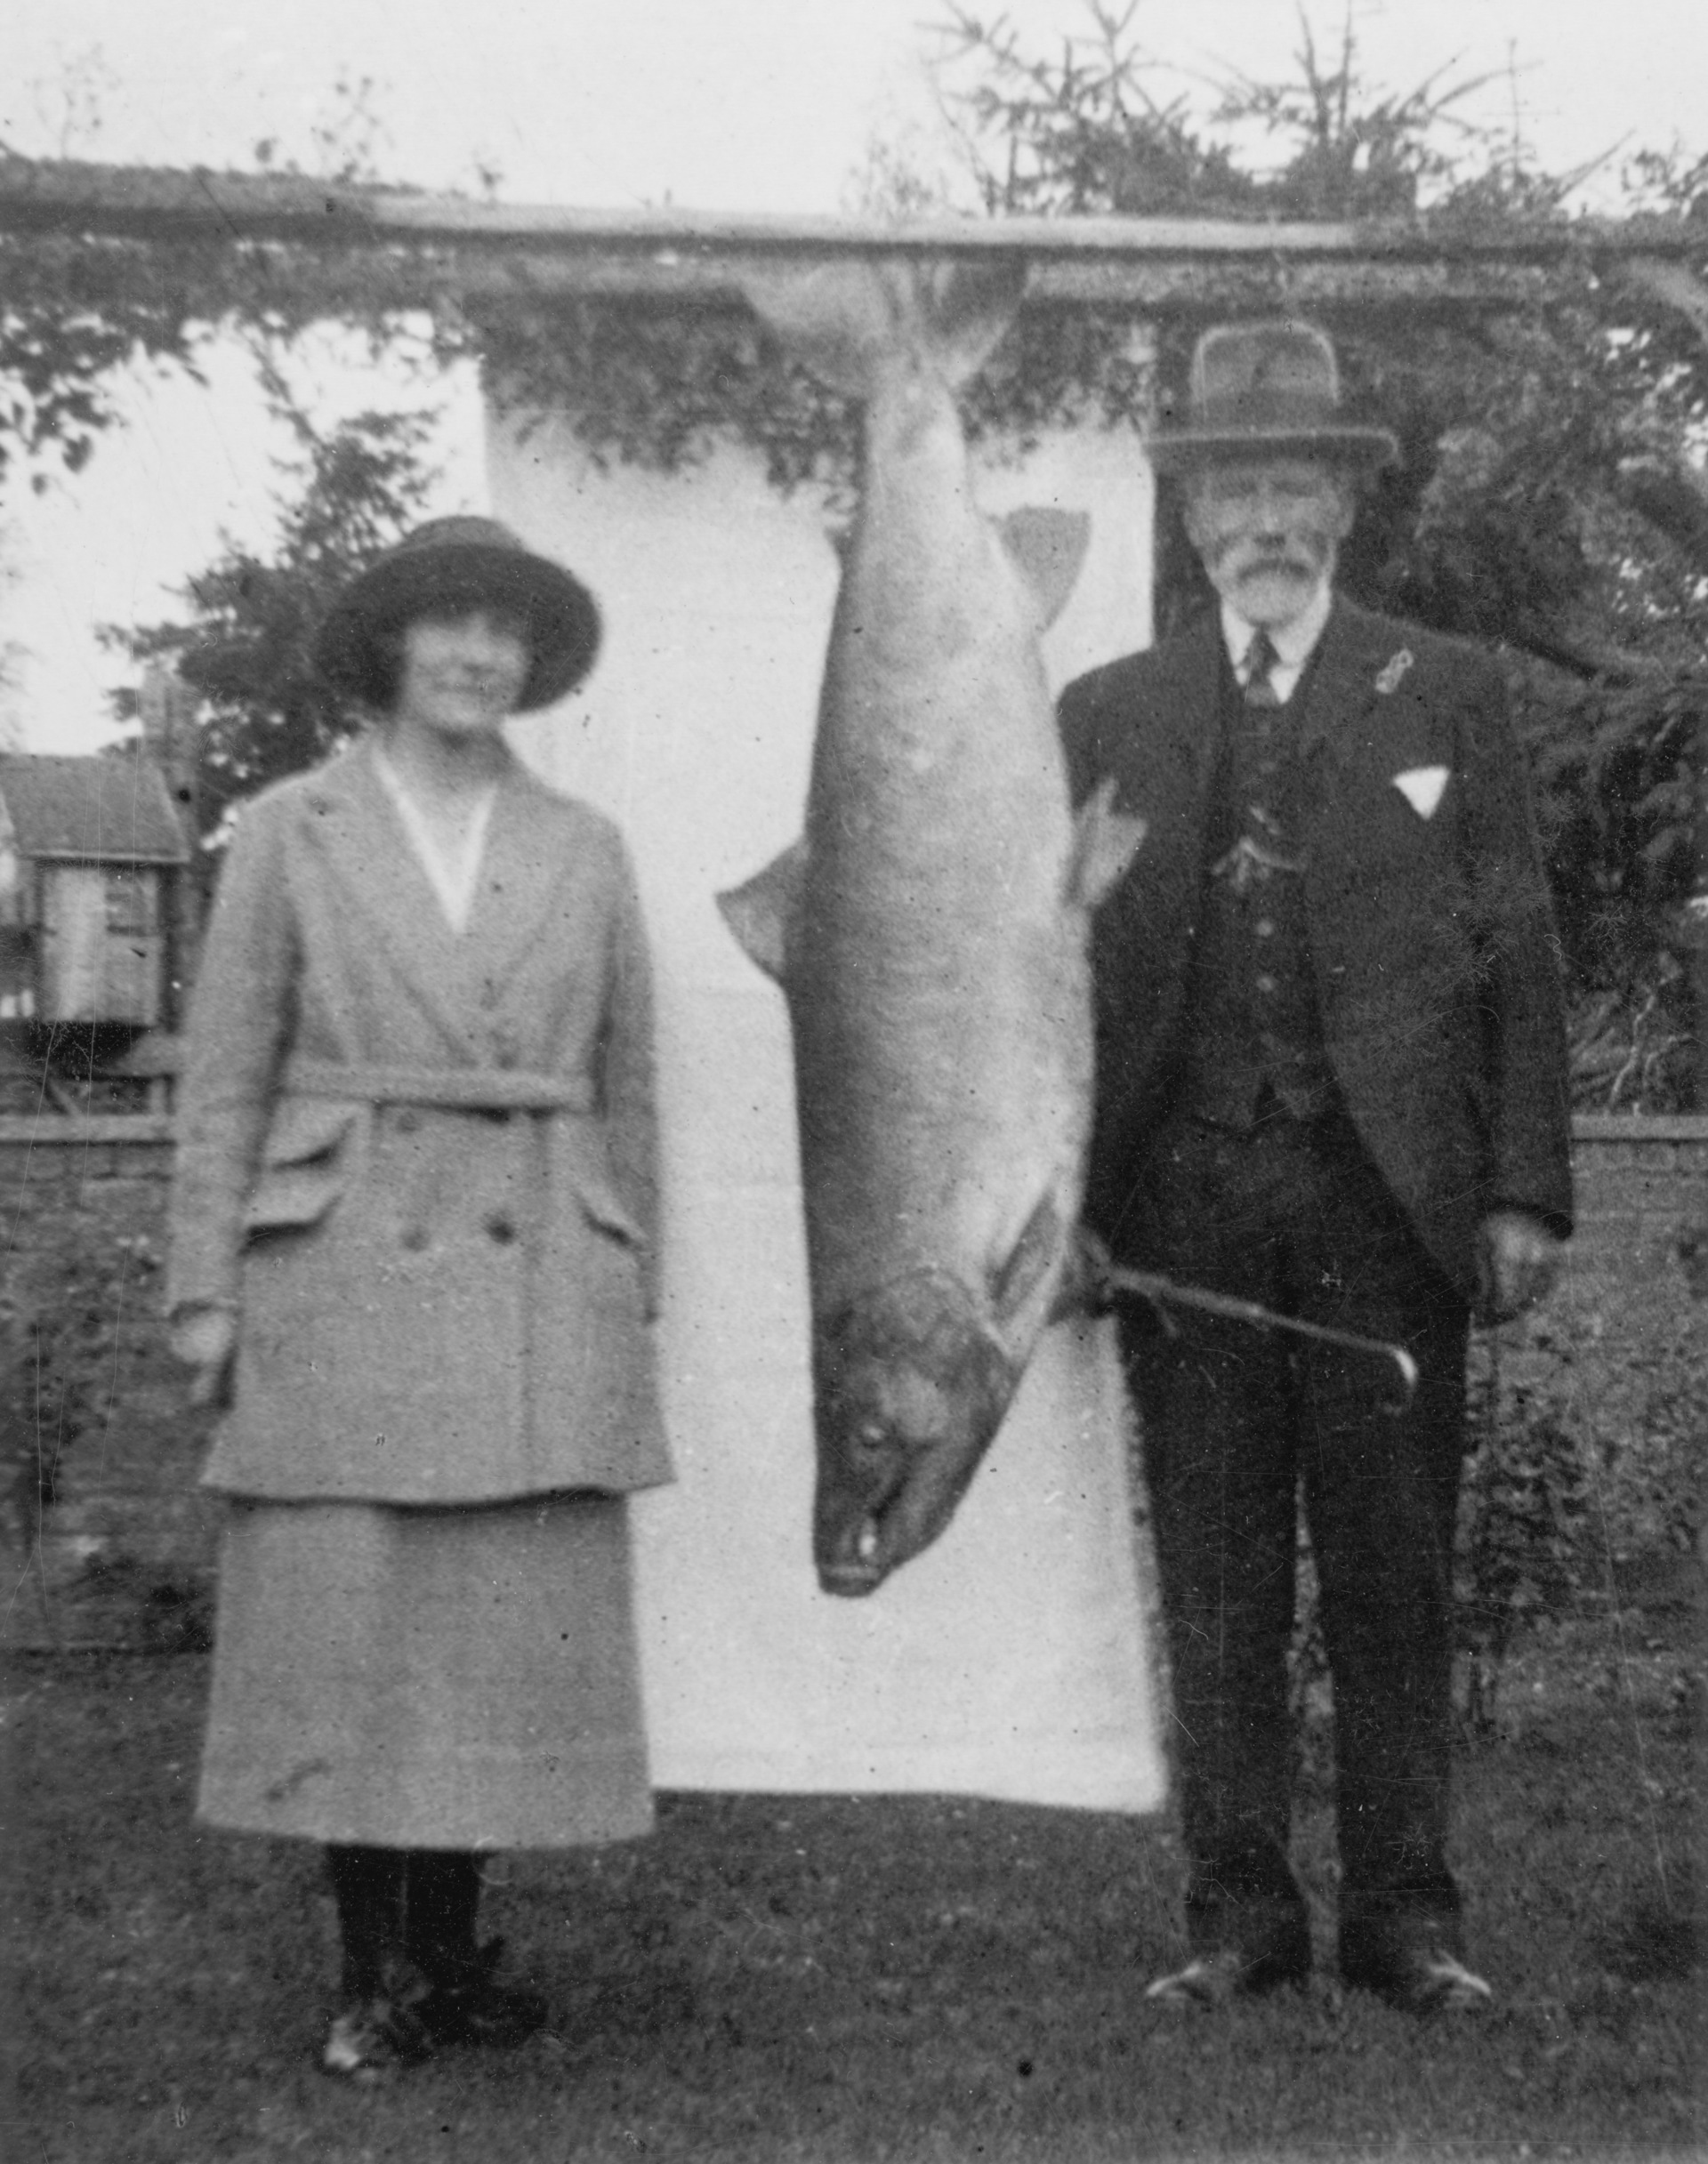 Georgina Ballantine and her father, James, a ghillie on the Glendelvine beat where she caught the record salmon.